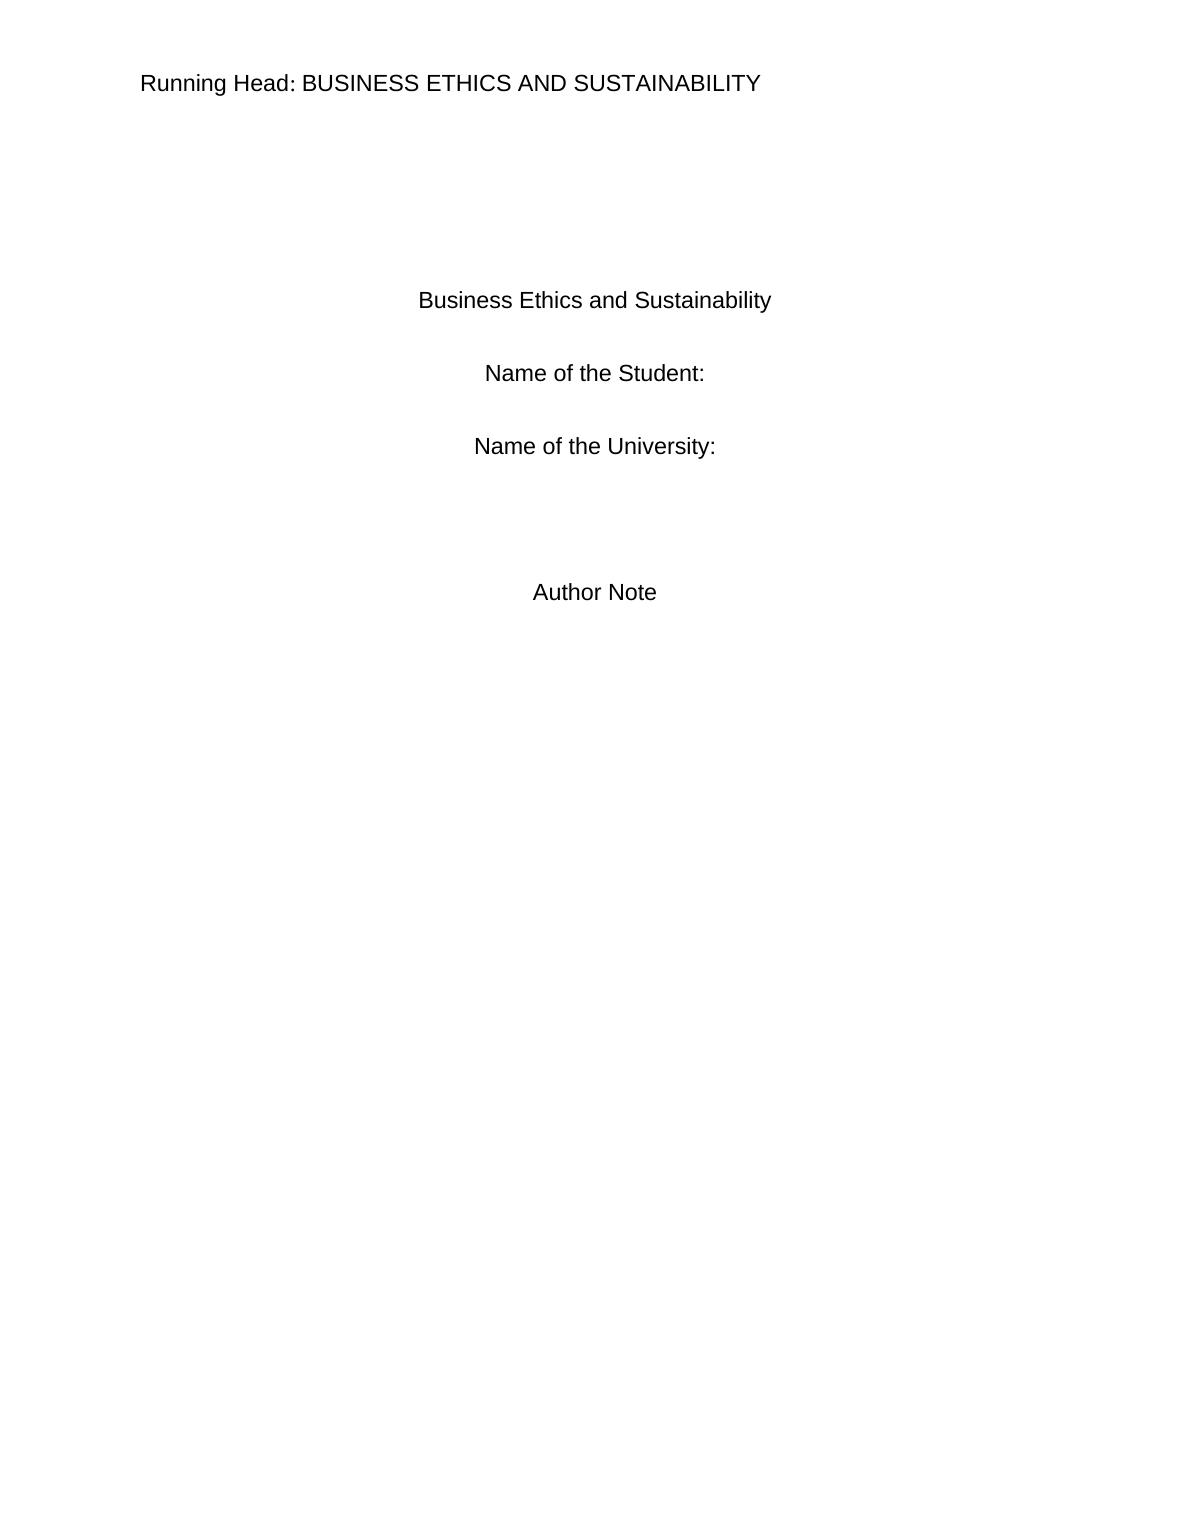 Report on Business Ethics and Sustainability in Organization_1